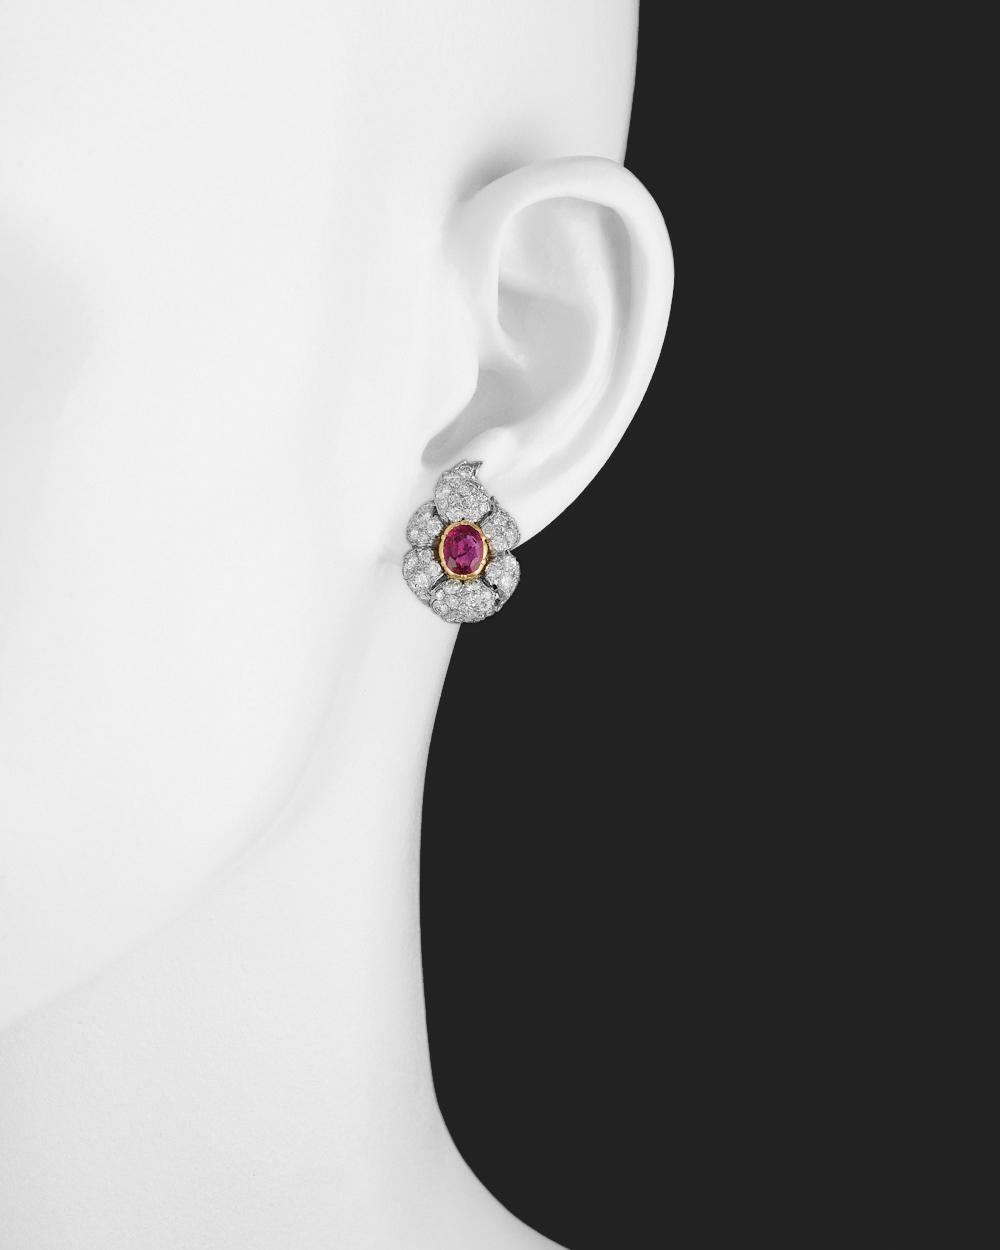 Ruby and diamond foliate cluster earclips, composed of two oval-shaped rubies weighing approximately 1.52 total carats, surrounded by circular-cut diamonds weighing approximately 1.90 total carats, one of the rubies set in 18k yellow gold and the